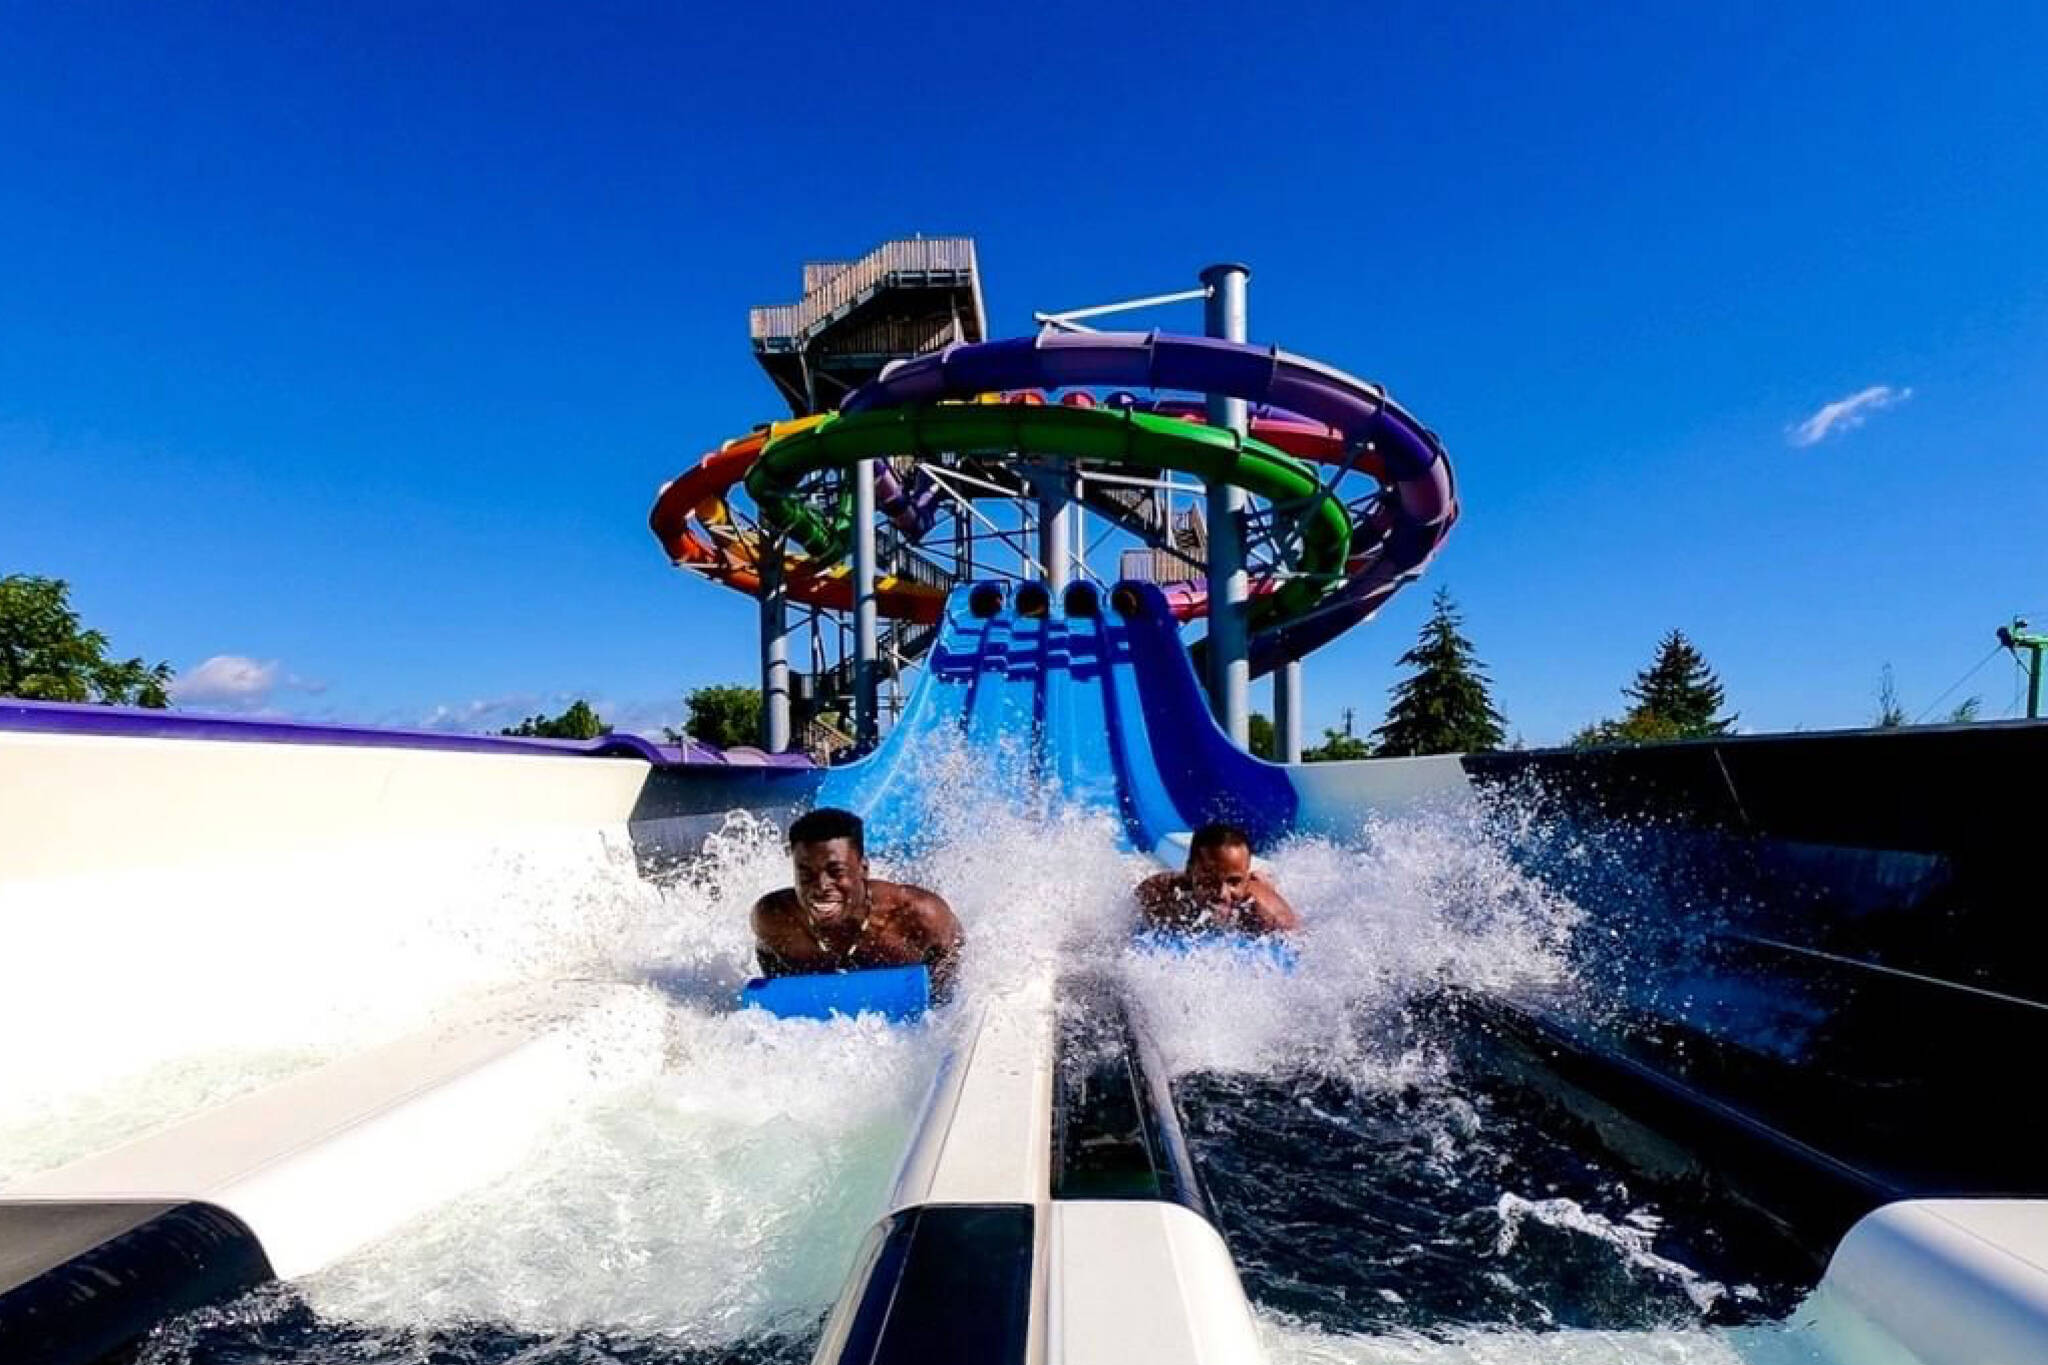 Toronto's biggest waterpark opens for the season next week